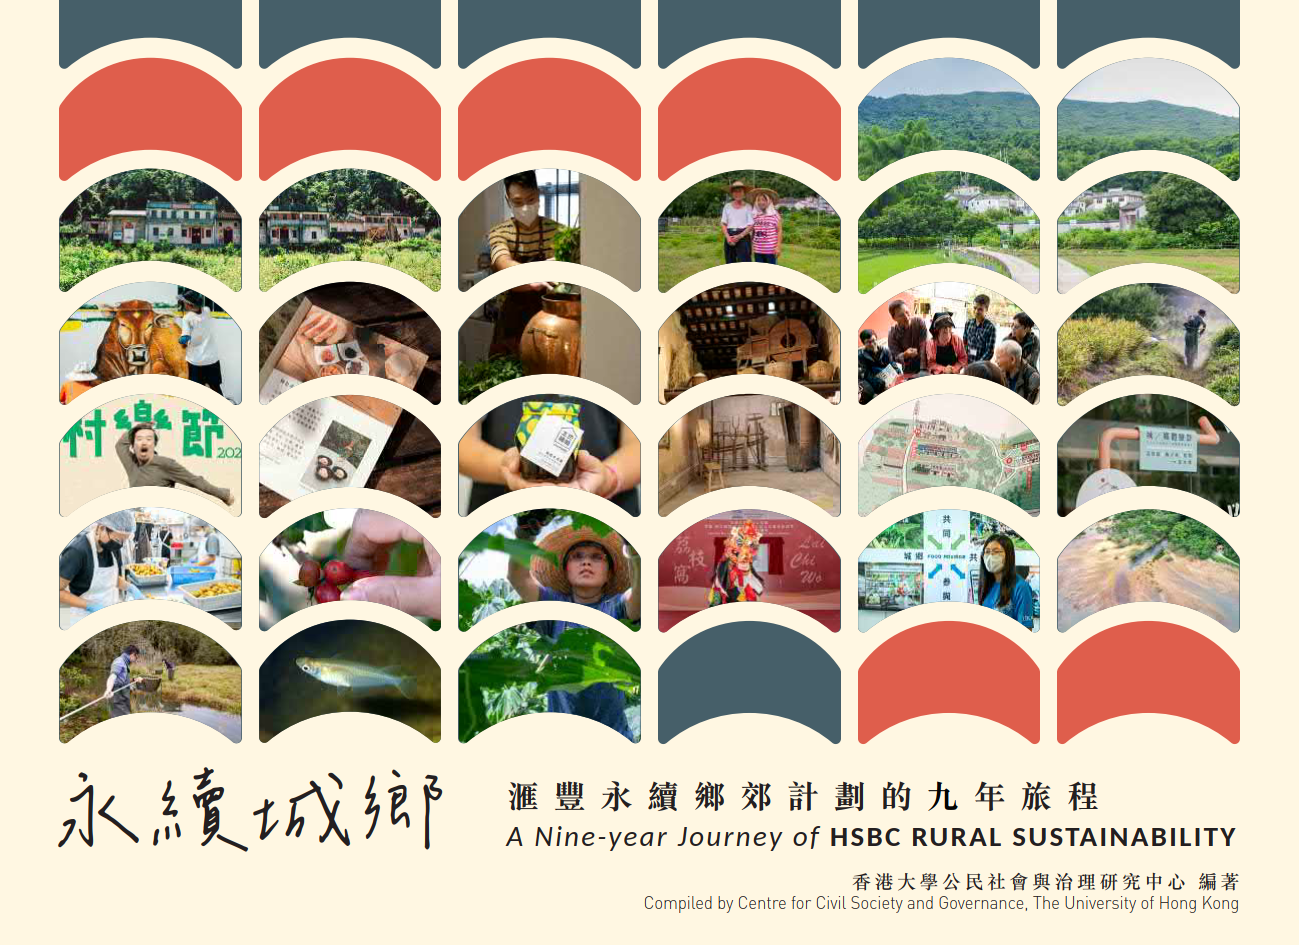 A Nine-year Journey of HSBC RURAL SUSTAINABILITY